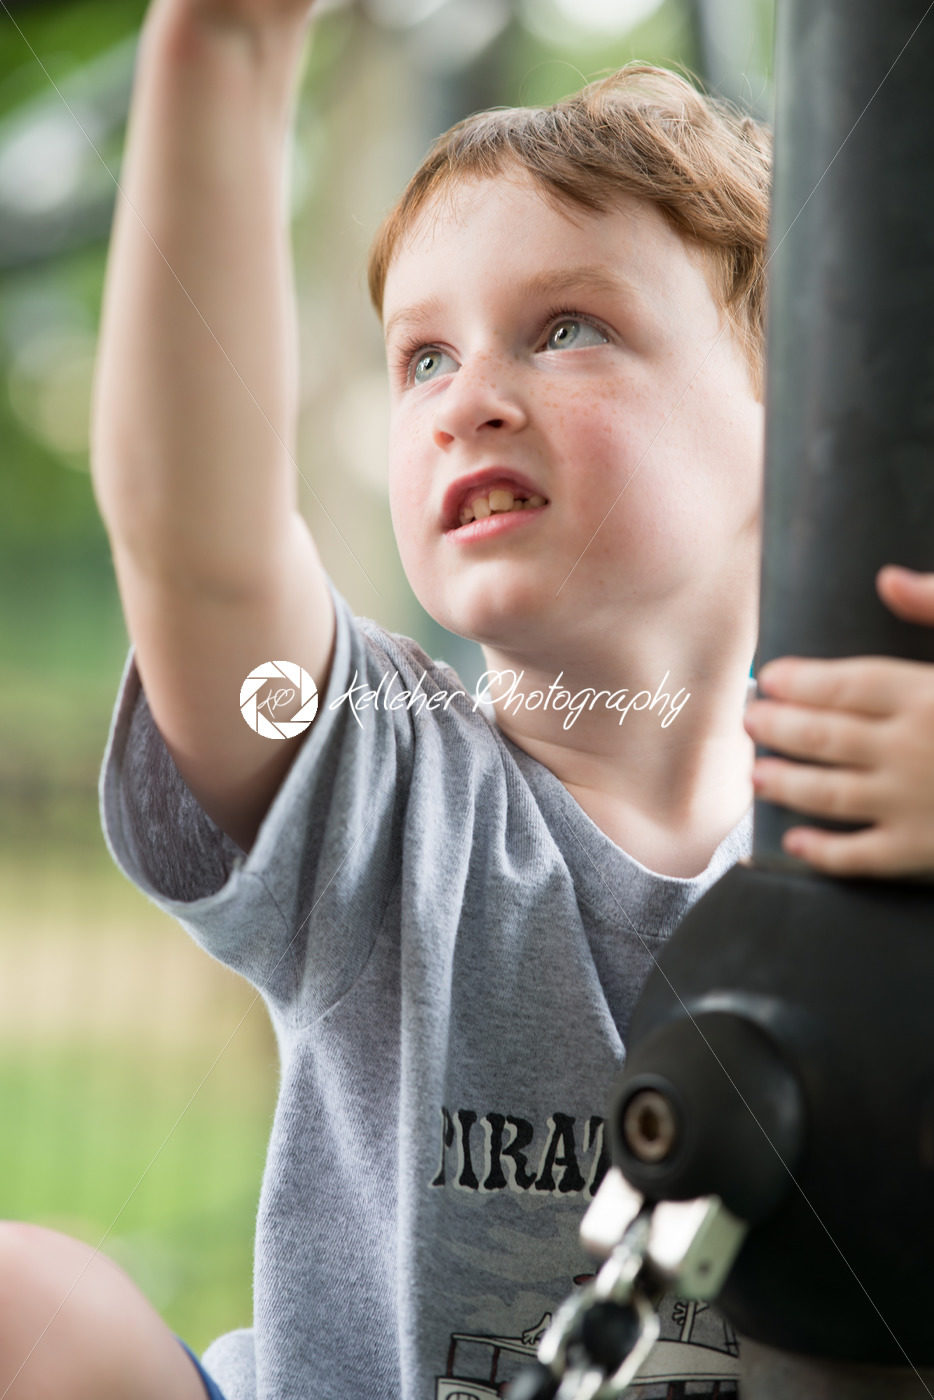 Young boy having fun outside at park on a playground climbing set - Kelleher Photography Store